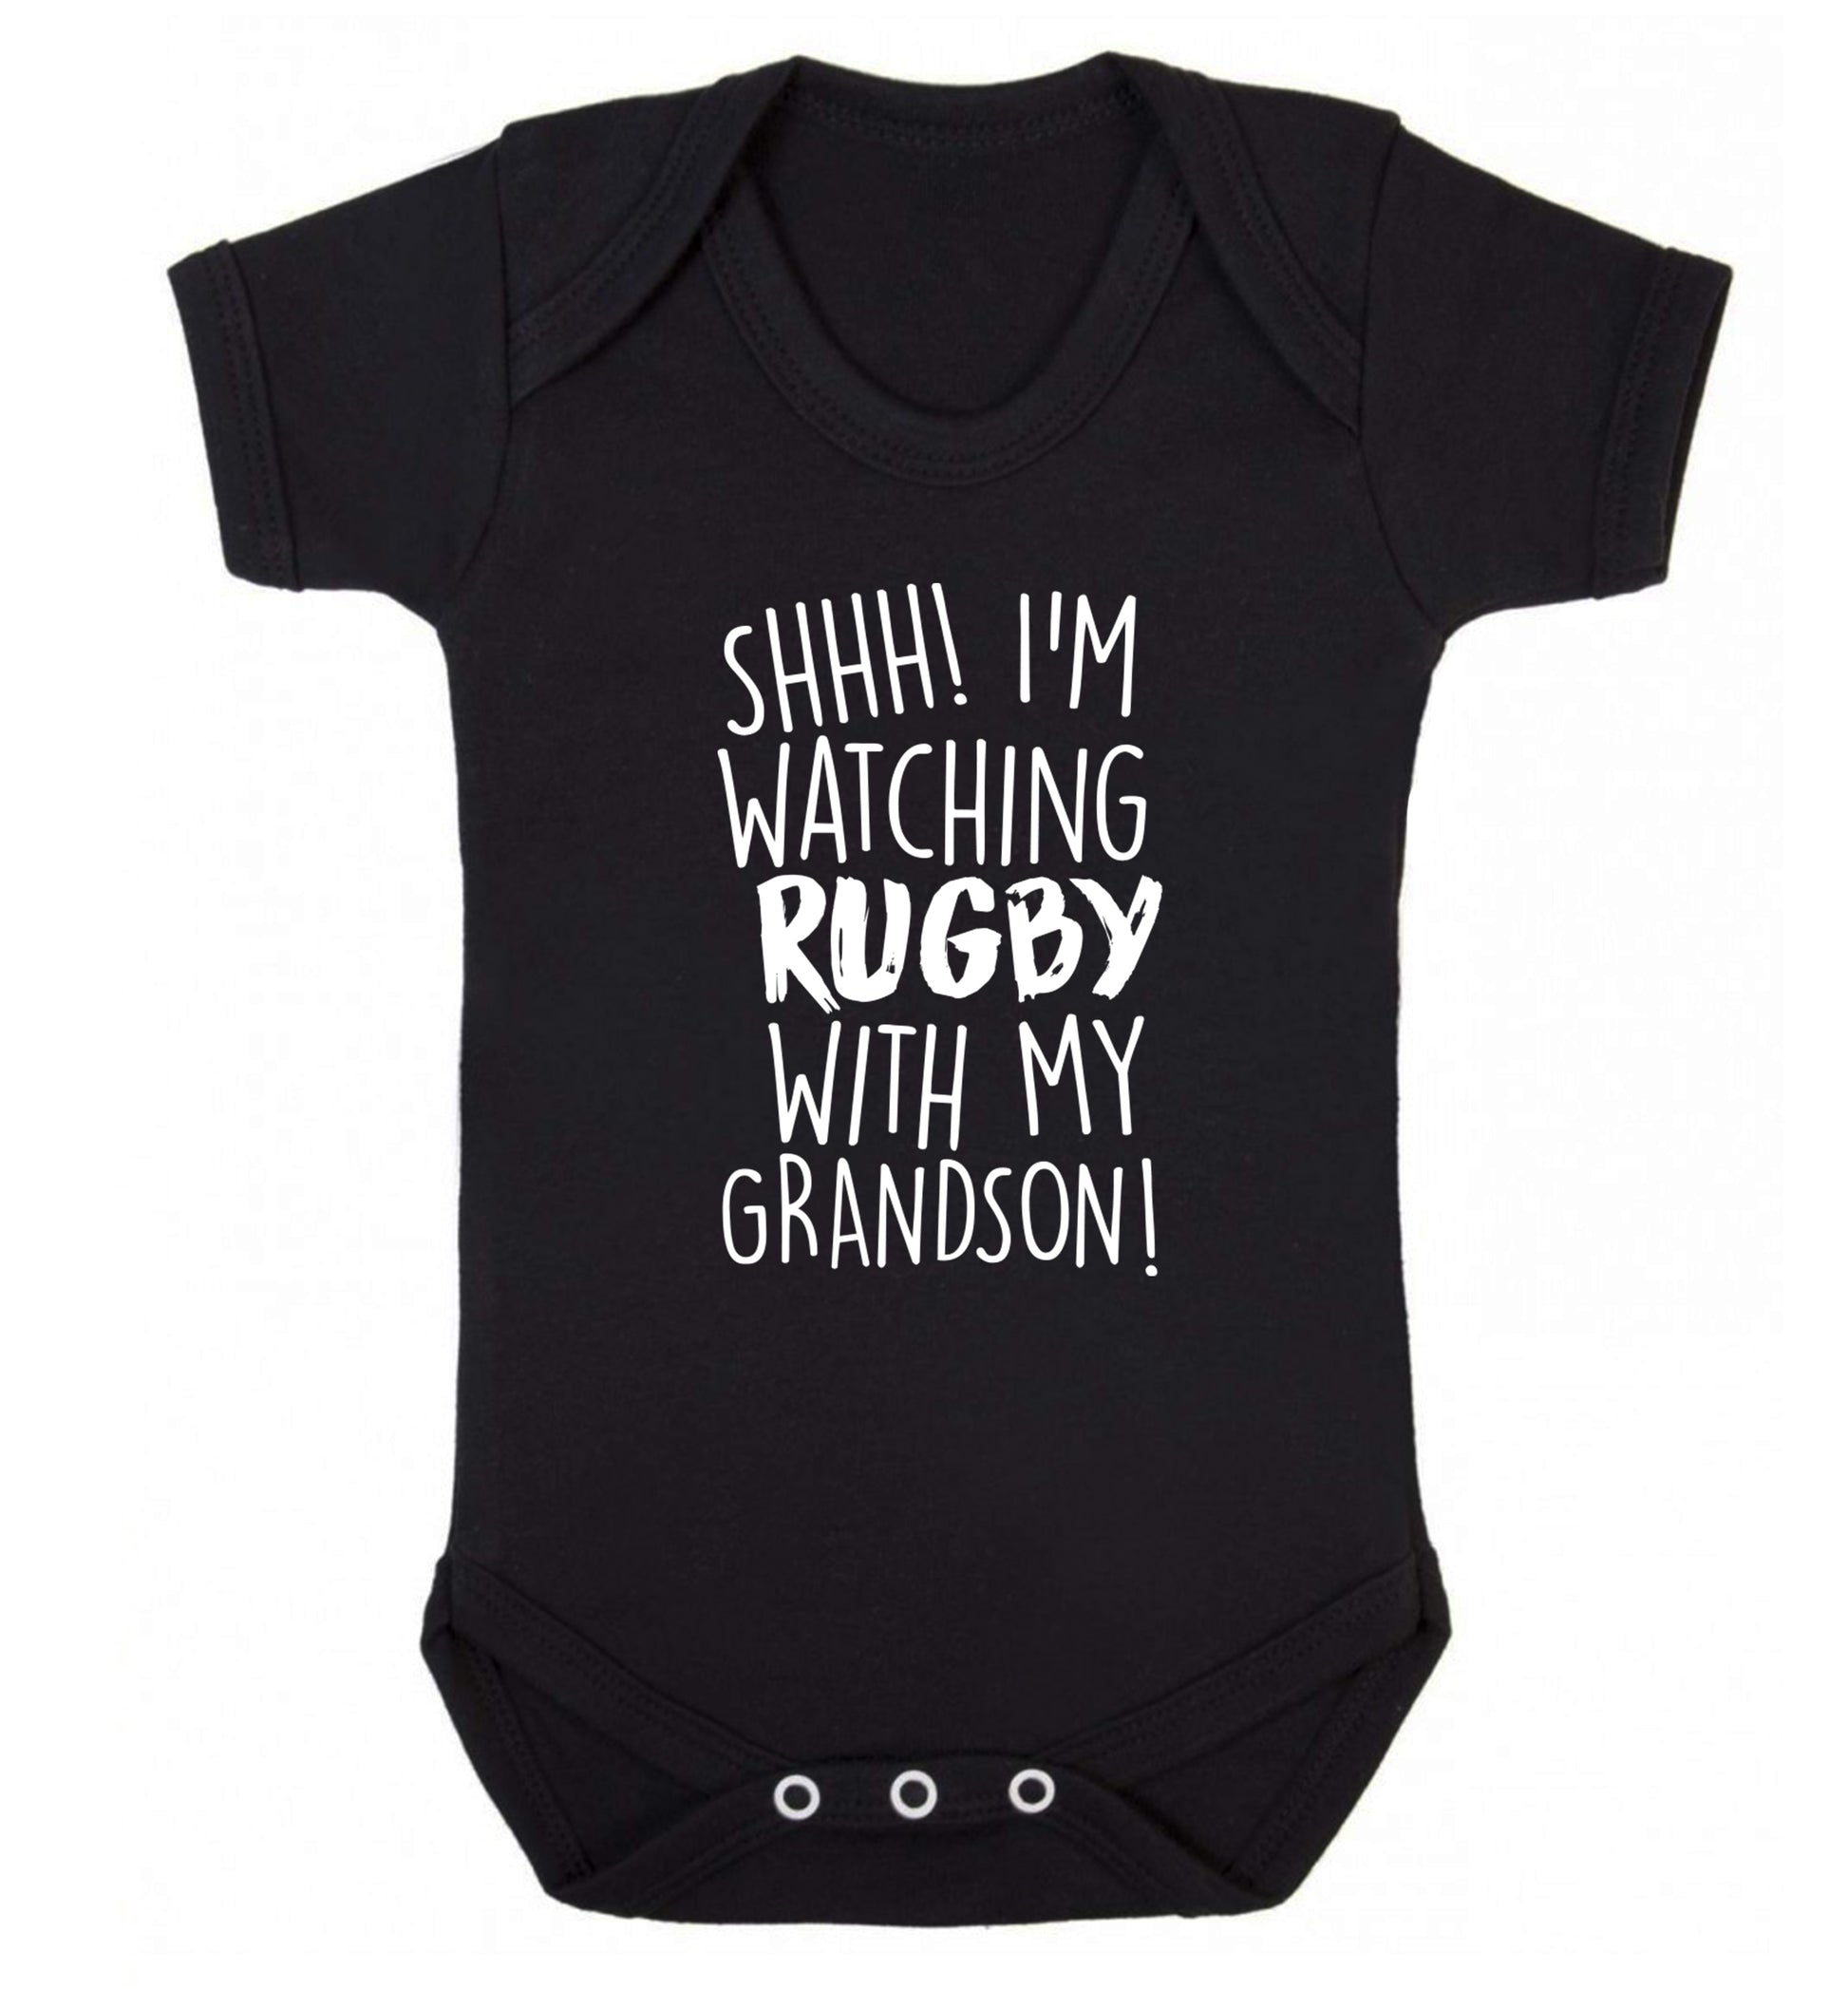 Shh I'm watching rugby with my grandson Baby Vest black 18-24 months